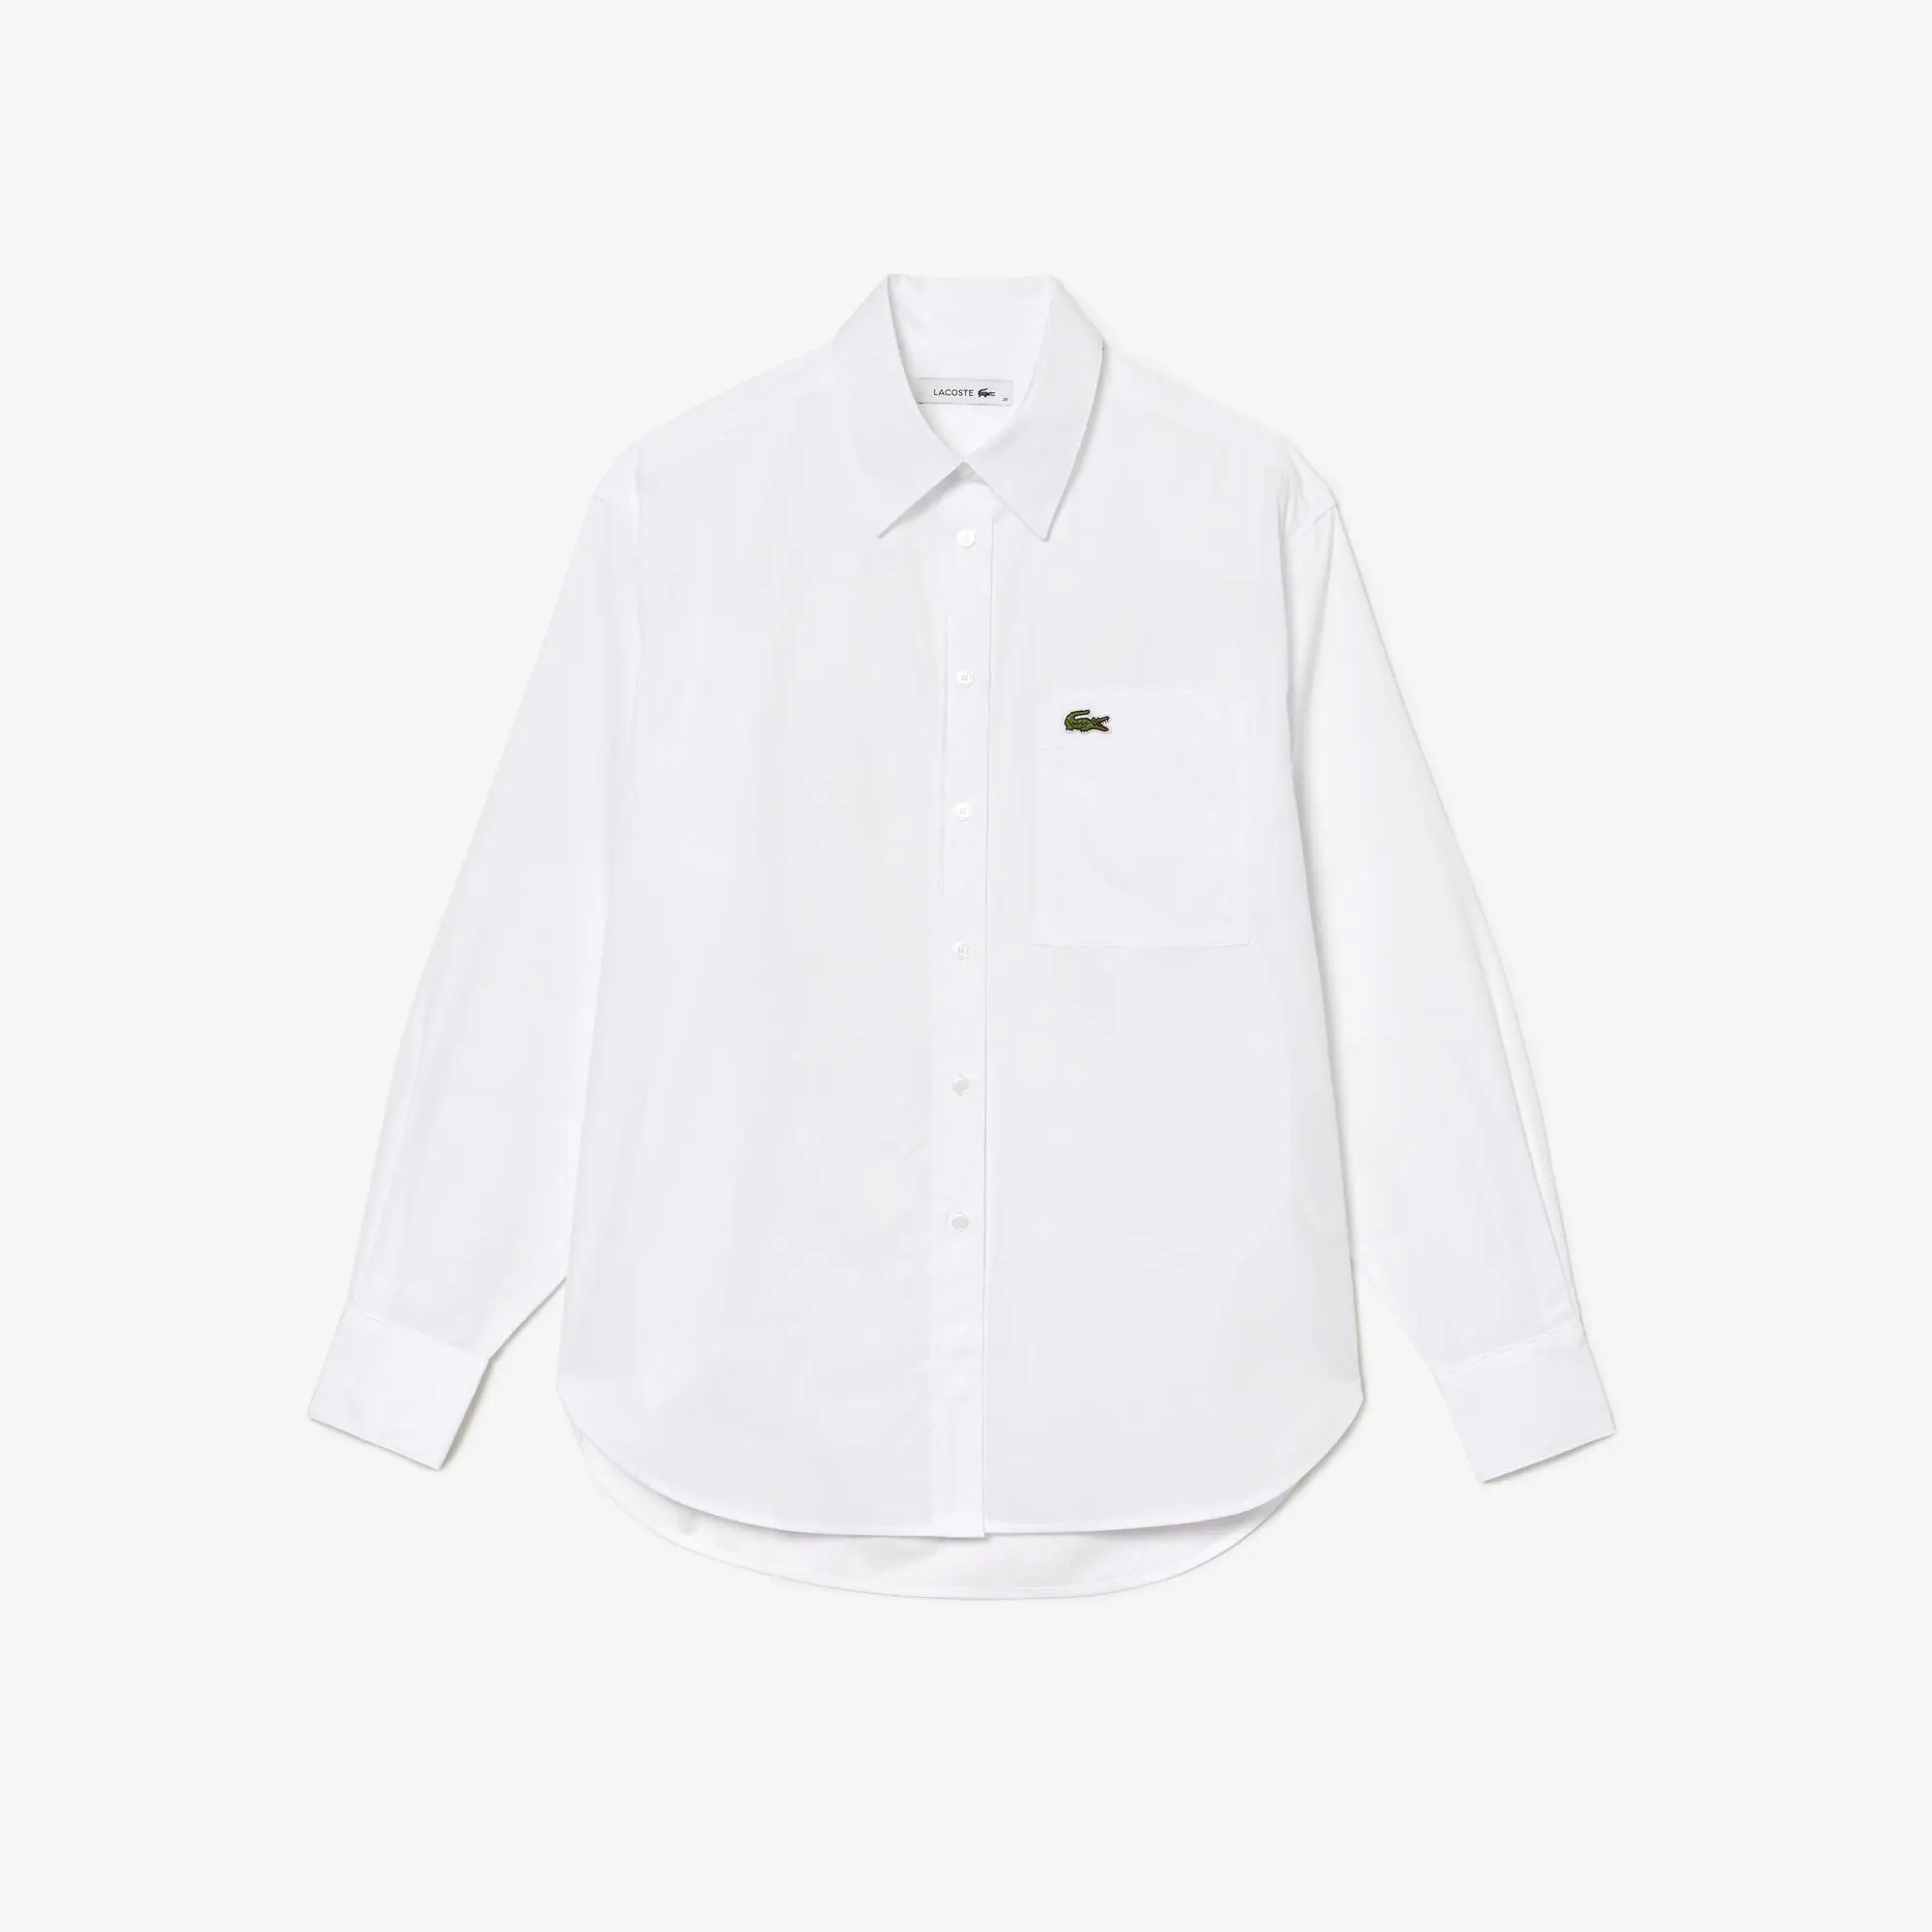 Lacoste Women's Lacoste French Collar Oversized Shirt. 2